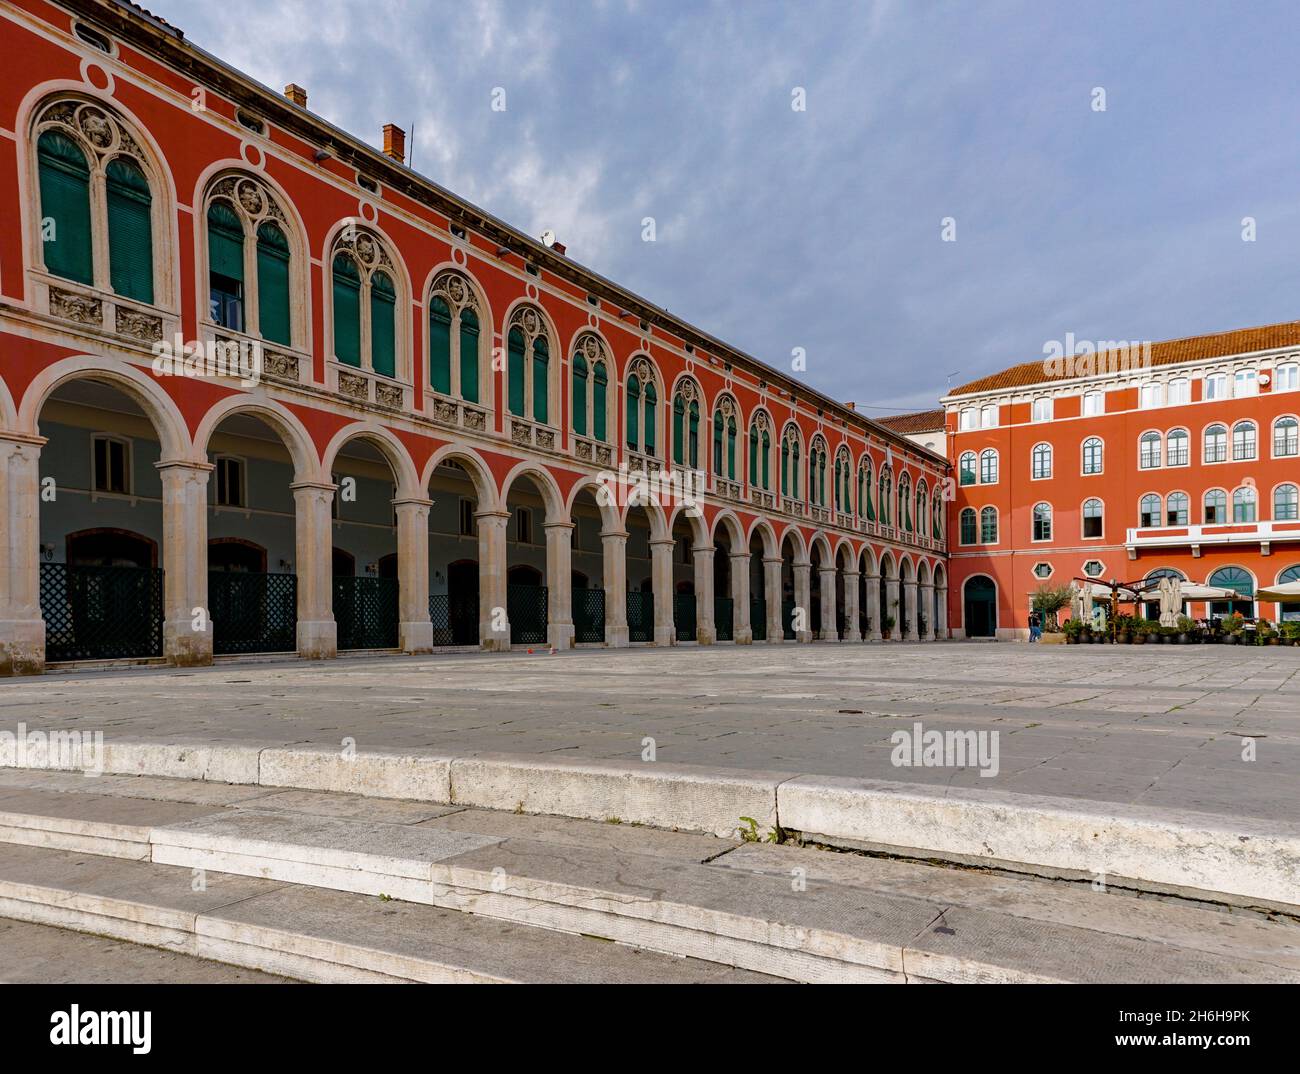 Split, Croatia - 12 November, 2021: view of the Republic Square and its neo-Renaissance buildings on three sides in the historic city center of Split Stock Photo